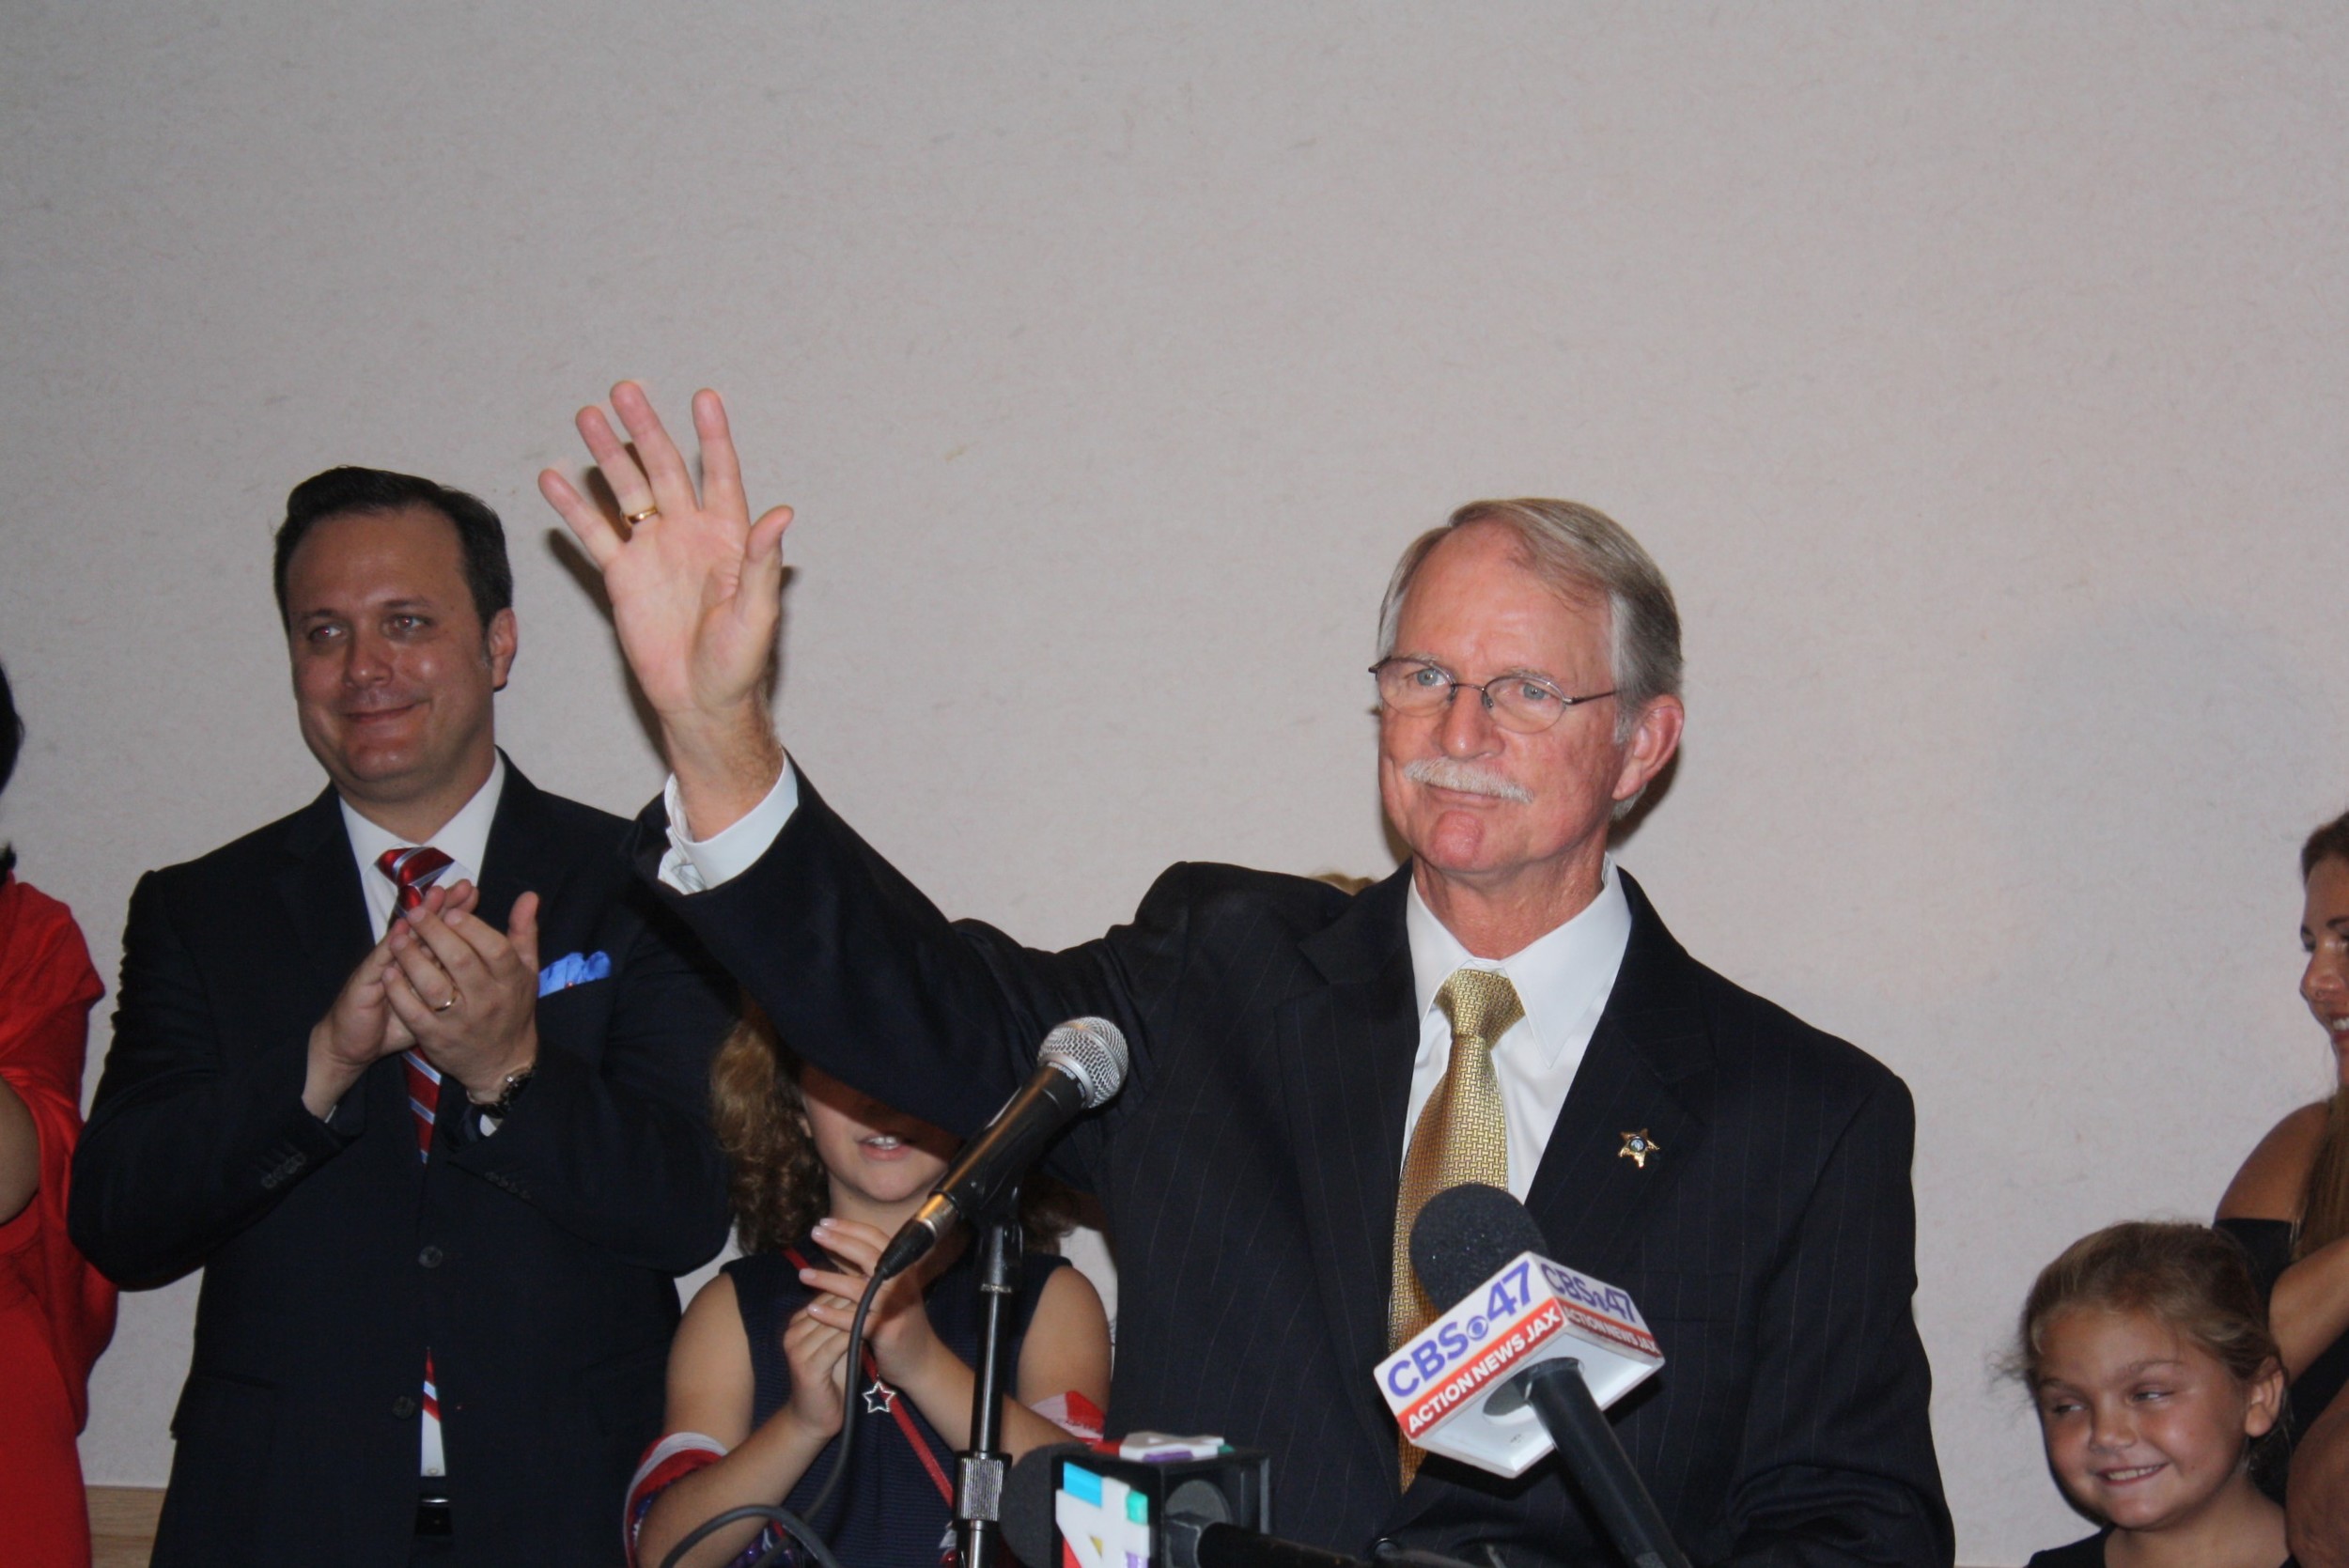 Former Jacksonville Sheriff John Rutherford acknowledges the cheers of supporters following his election victory in the Republican primary for the 4th congressional district.